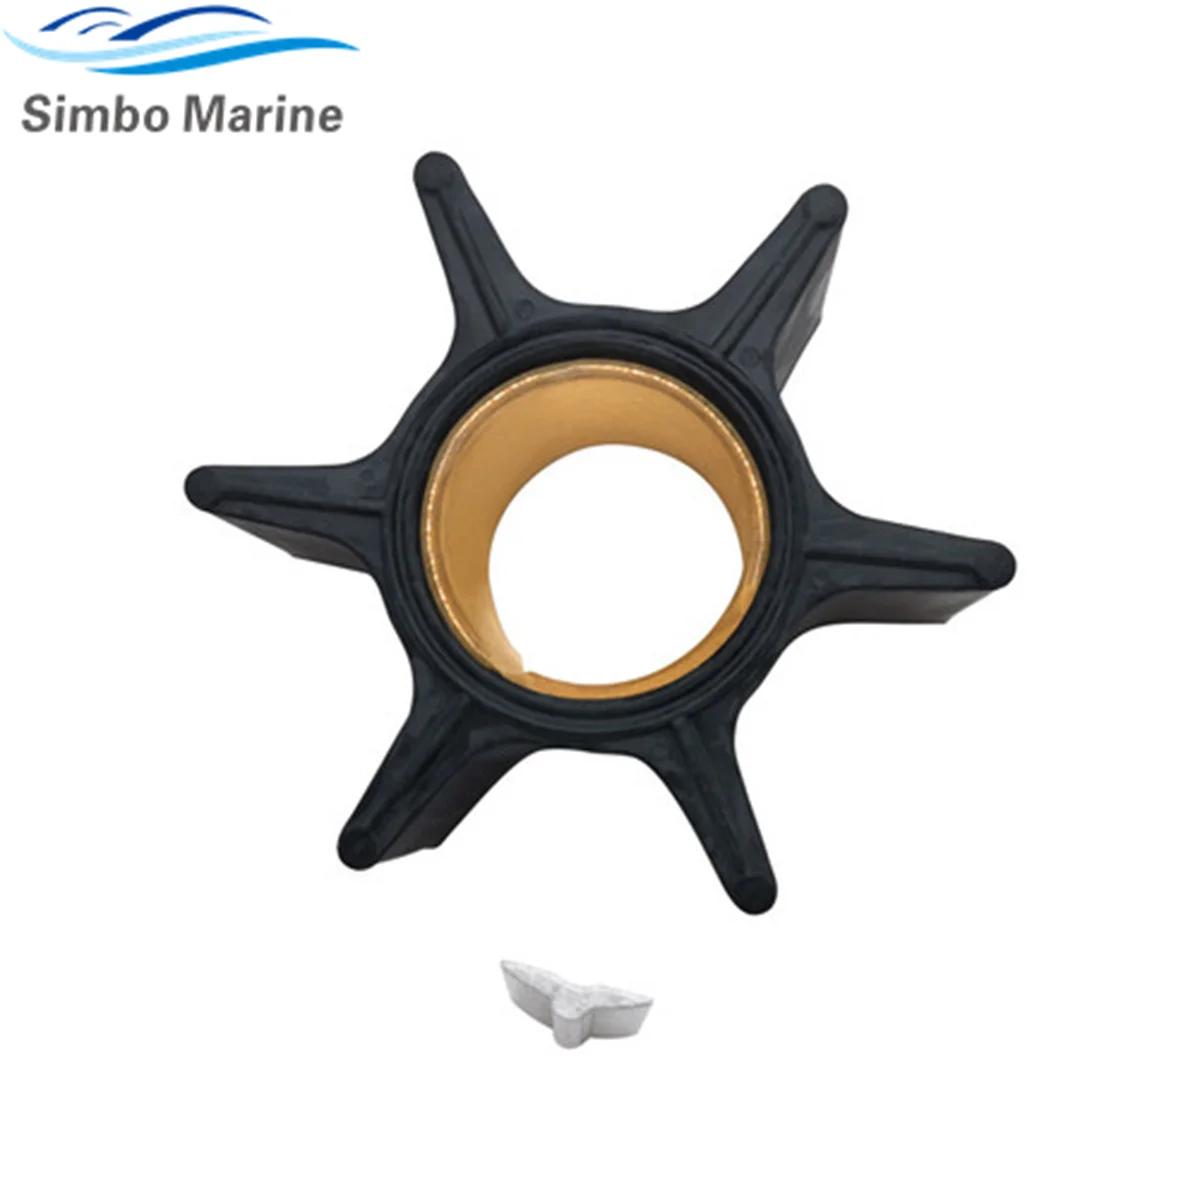 

F694065 Water Pump Impeller With Key For Force 85 90 120 125 150 HP Outboard 803631T 89984T3 Sierra 18-3017